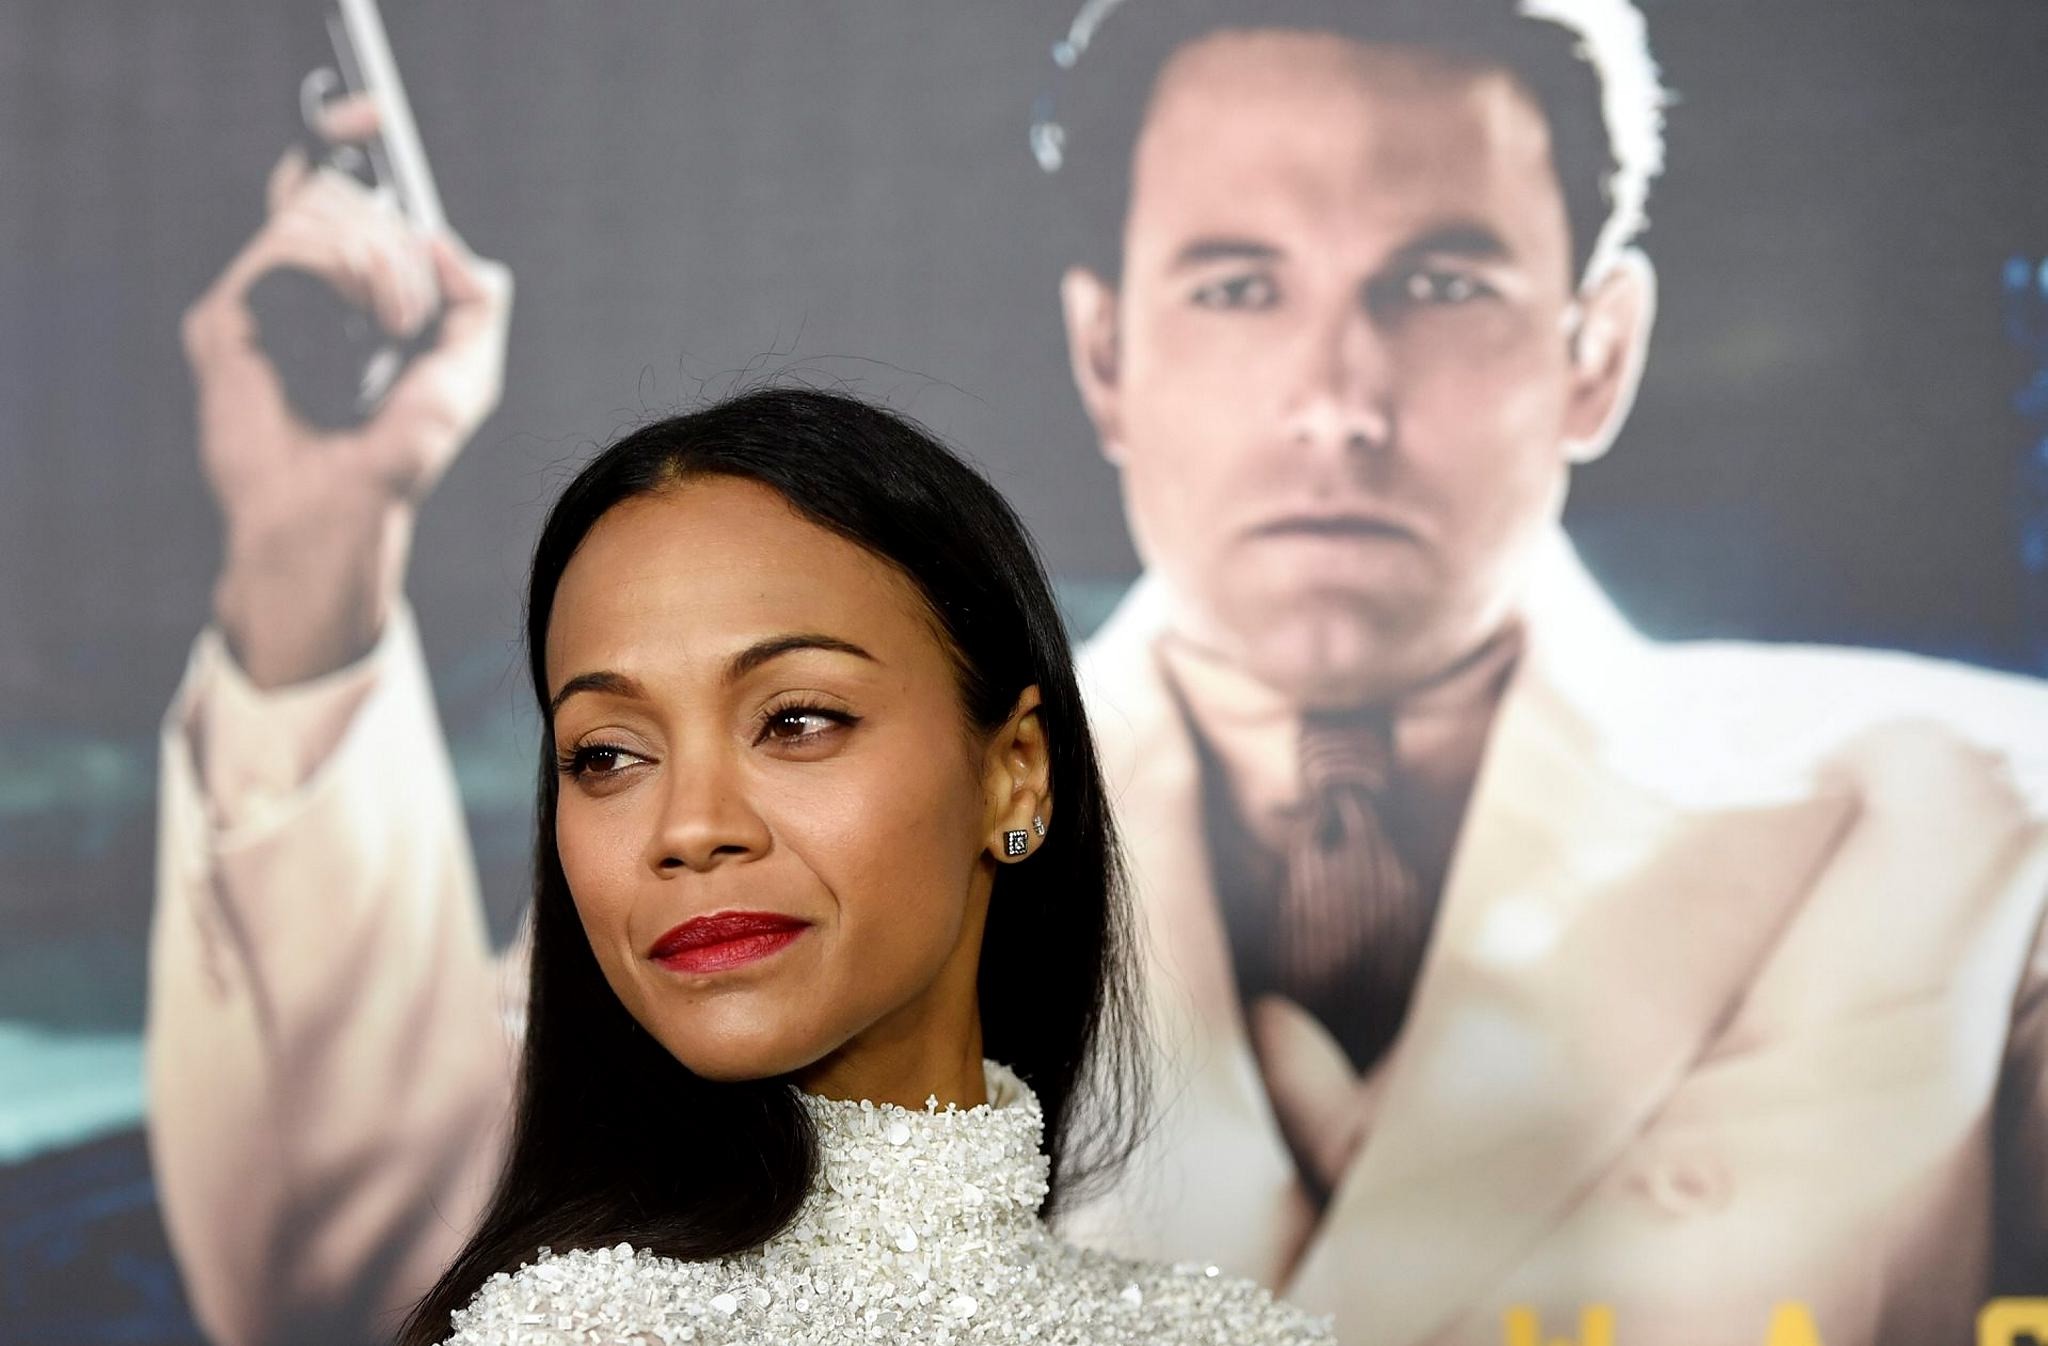 Zoe Saldana, a cast member in ,Live by Night,, poses at the premiere of the film at the TCL Chinese Theatre on Monday, Jan. 9, 2017 in Los Angeles. (AP Photo)